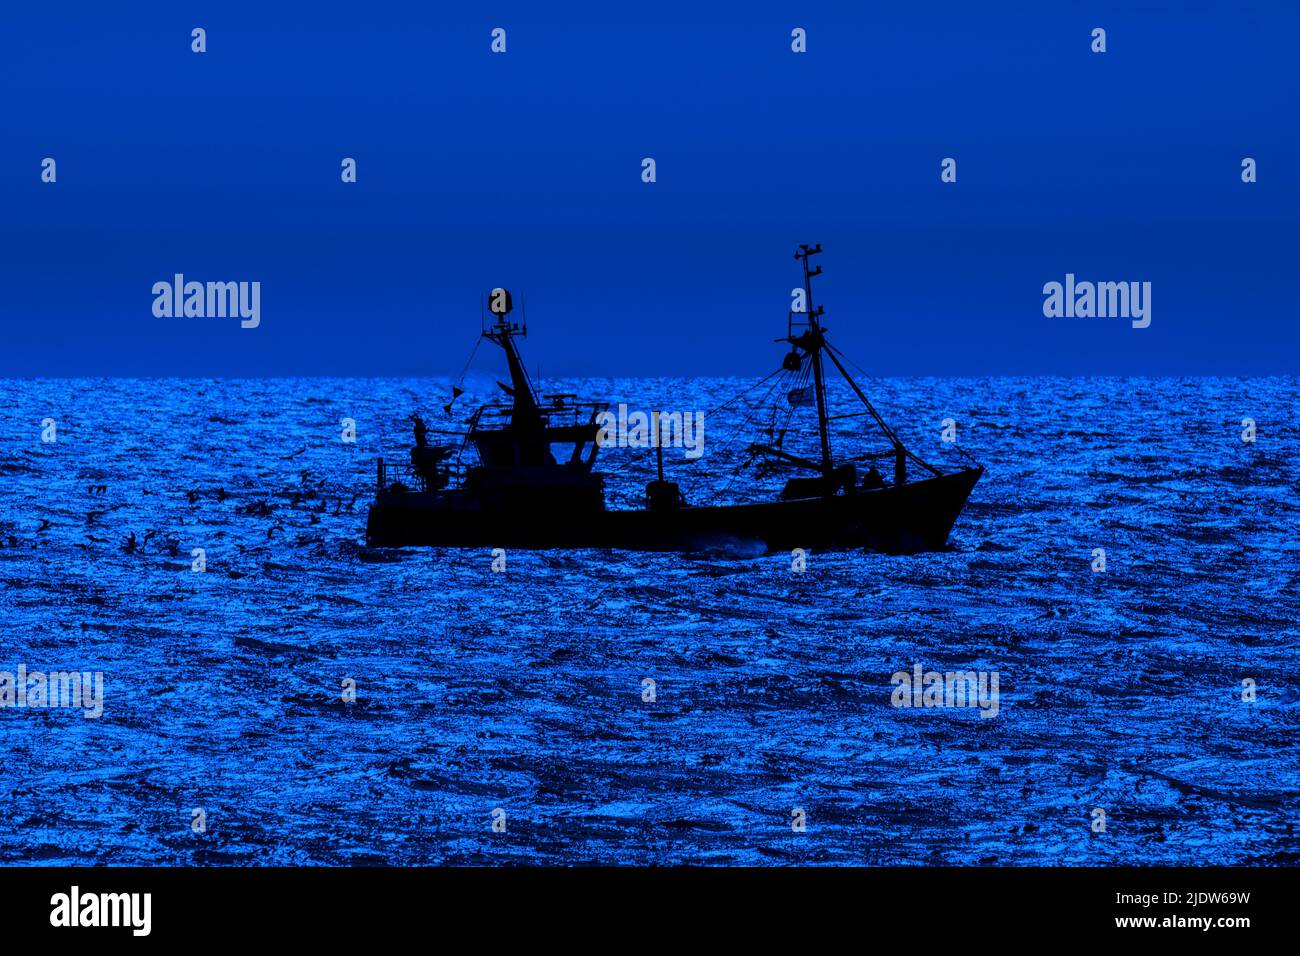 Bottom trawler, fishing boat sailing along the North Sea coast silhouetted against blue night sky in front of Nieuwpoort / Nieuport, Flanders, Belgium Stock Photo